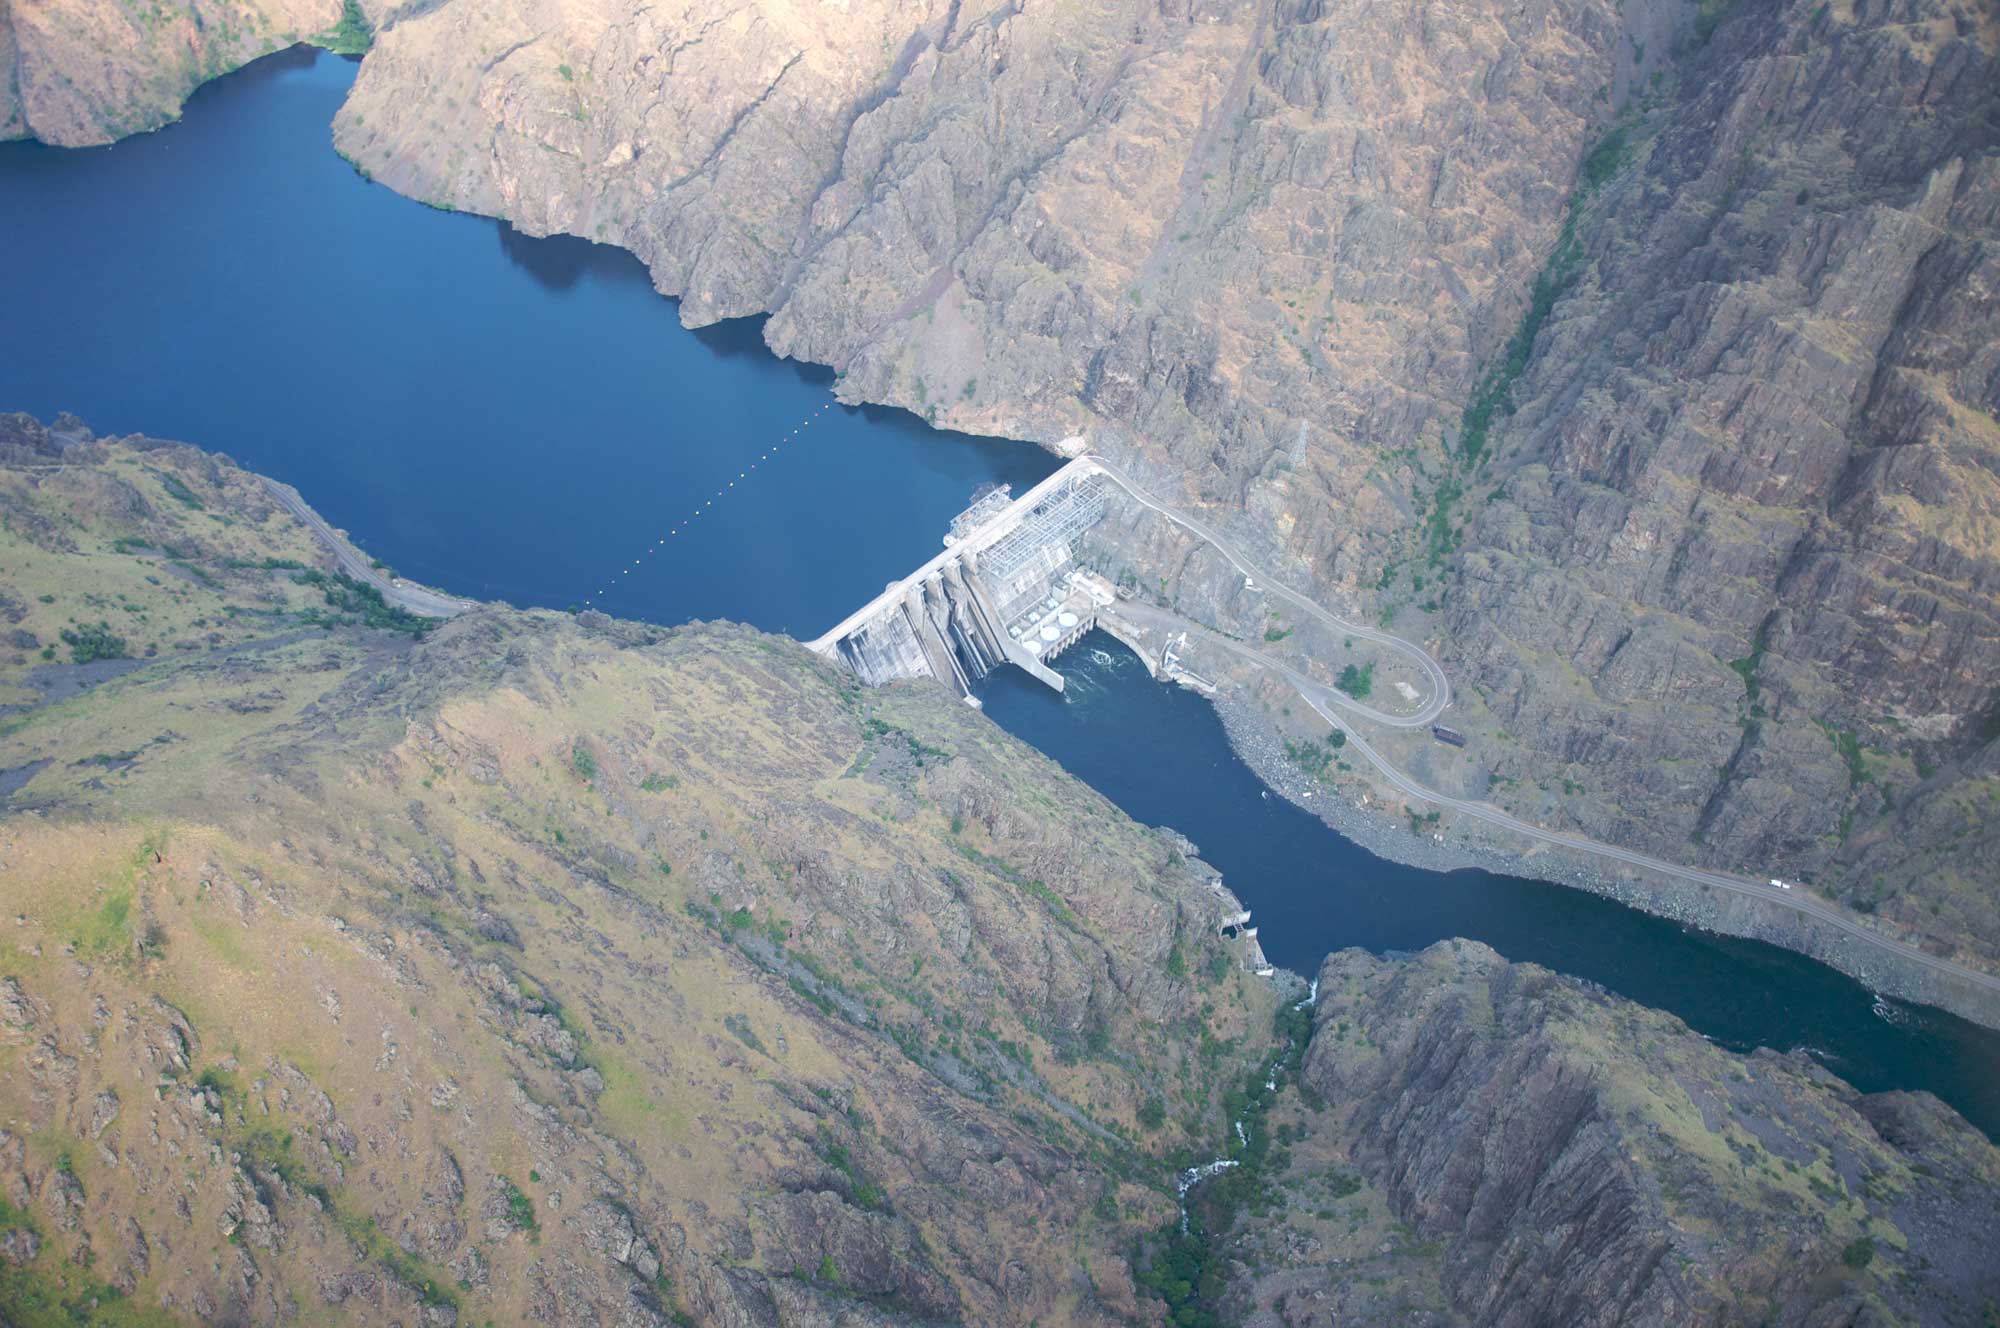 Aerial photograph of Hells Canyon Dam on the Snake River on the Idaho-Oregon border. The photo shows a concrete dam built across a river at the bottom of a canyon with steeply sloping walls. A reservoir is held back behind the dam, whereas a river can be seen downstream from the dam. On the far wall of the canyon, a road can be seen leading up to the dam.